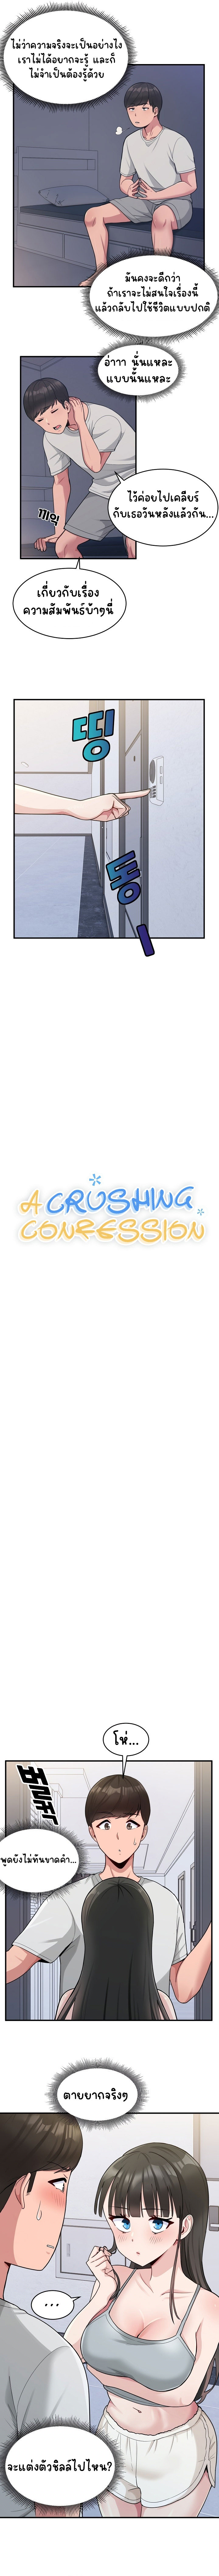 A Crushing Confession 2 (2)